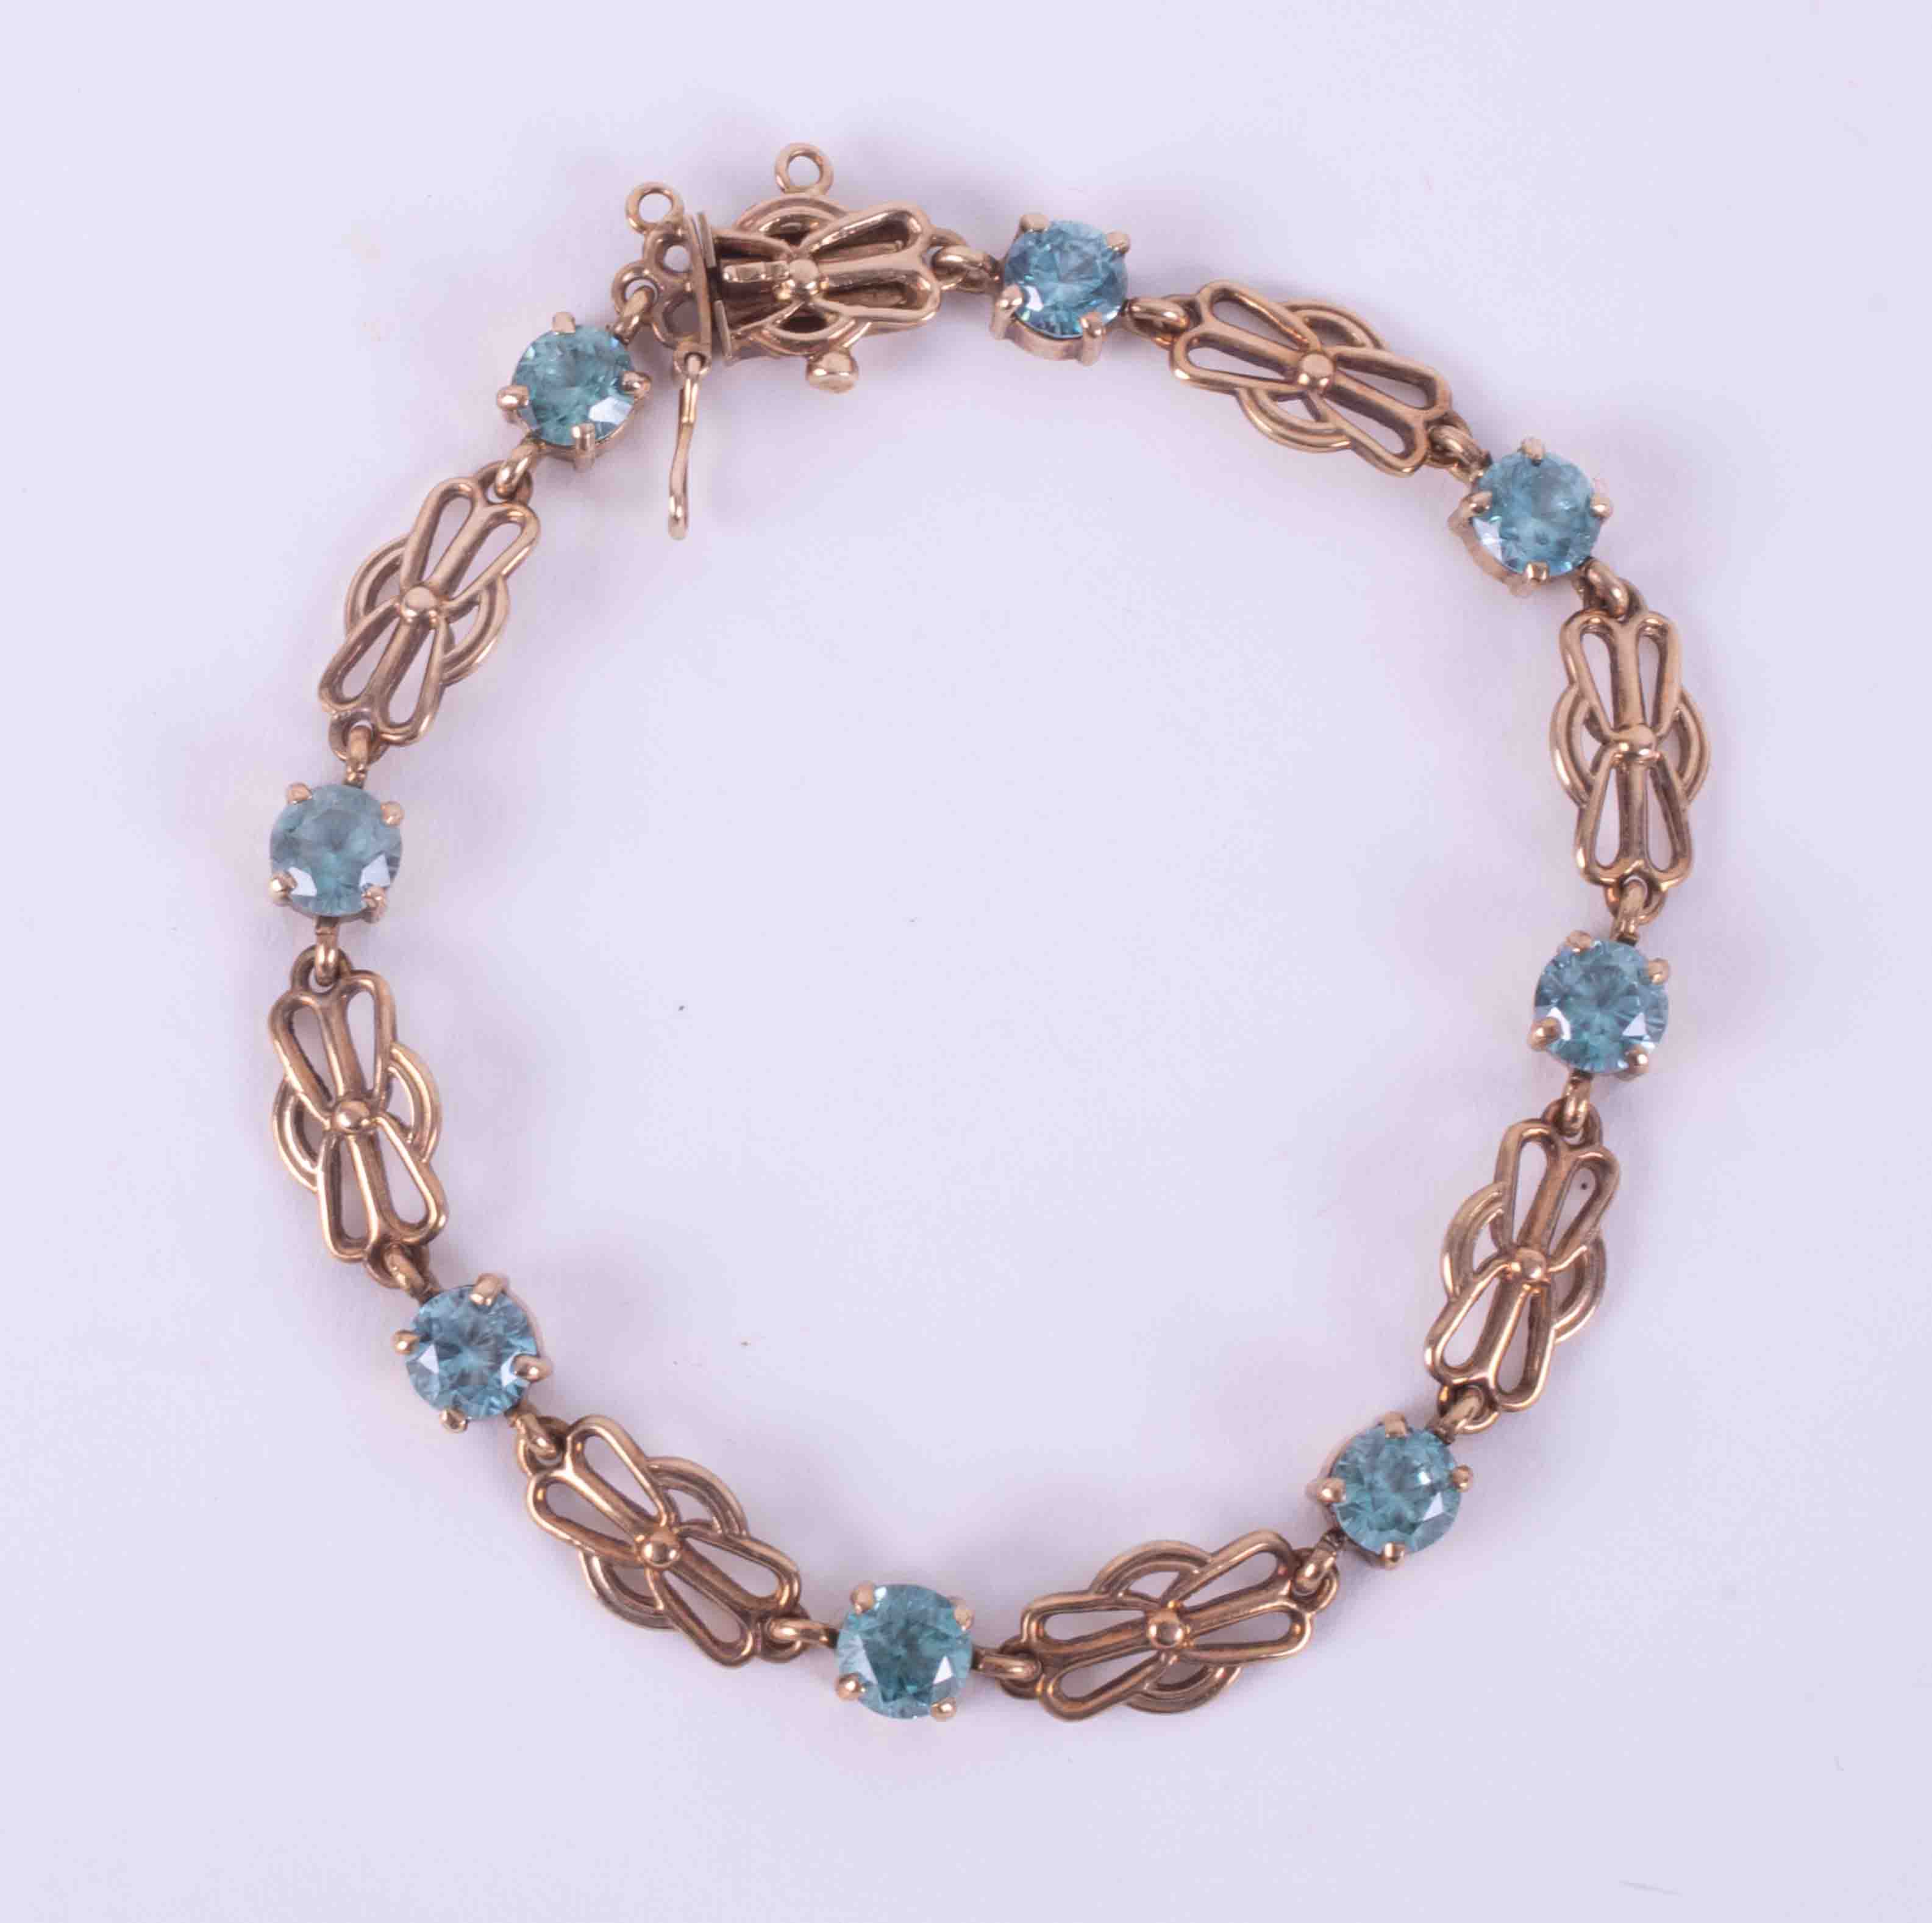 A 9ct yellow gold fancy link bracelet set with eight blue round faceted stones (possibly blue zircon